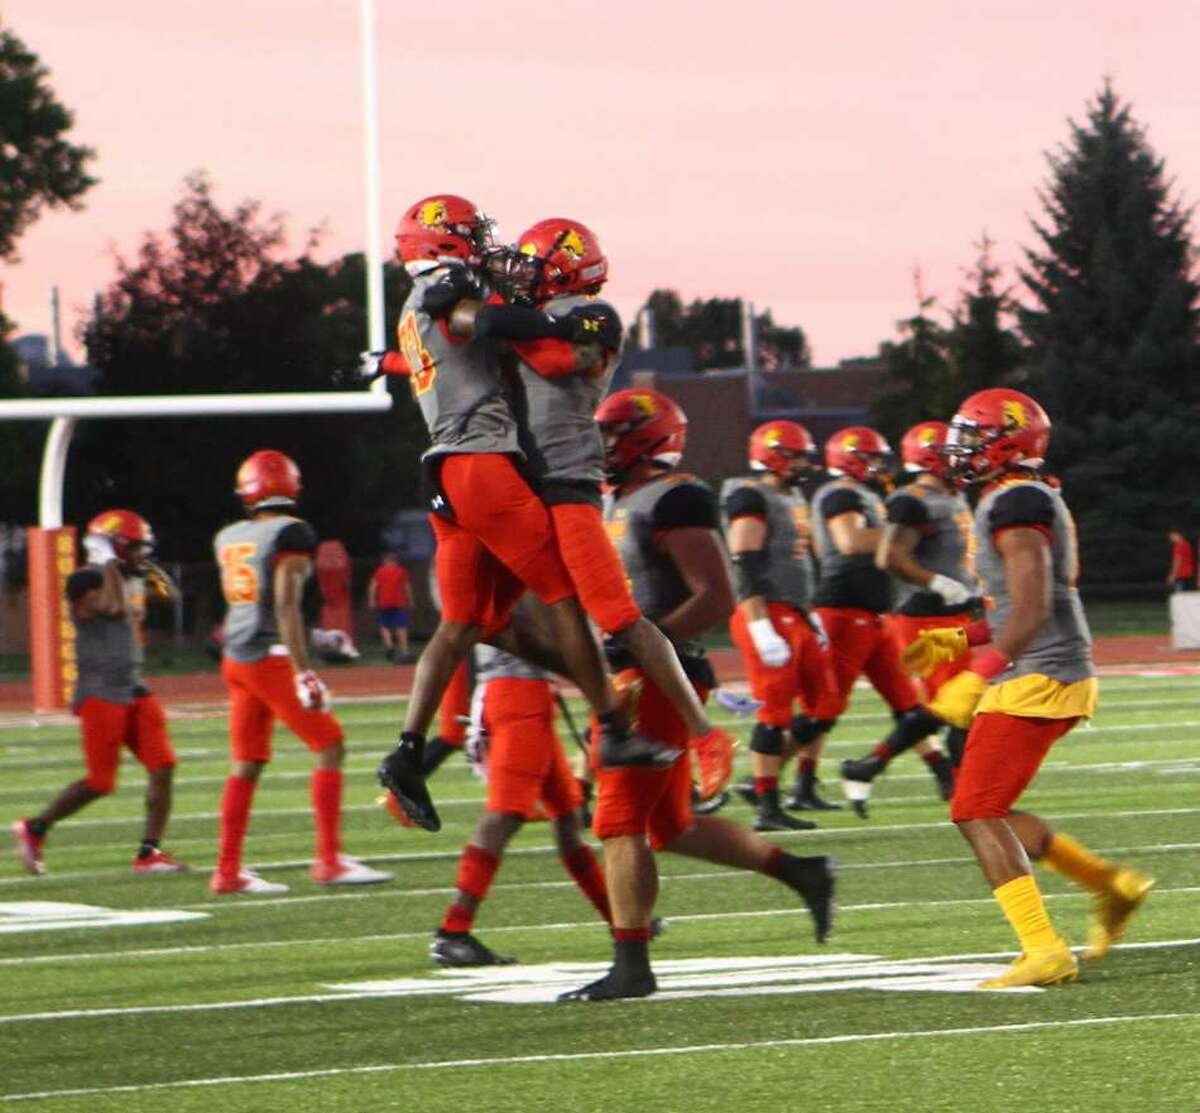 The Ferris State football team will take on Valdosta State in the DII National Title Game on Saturday.